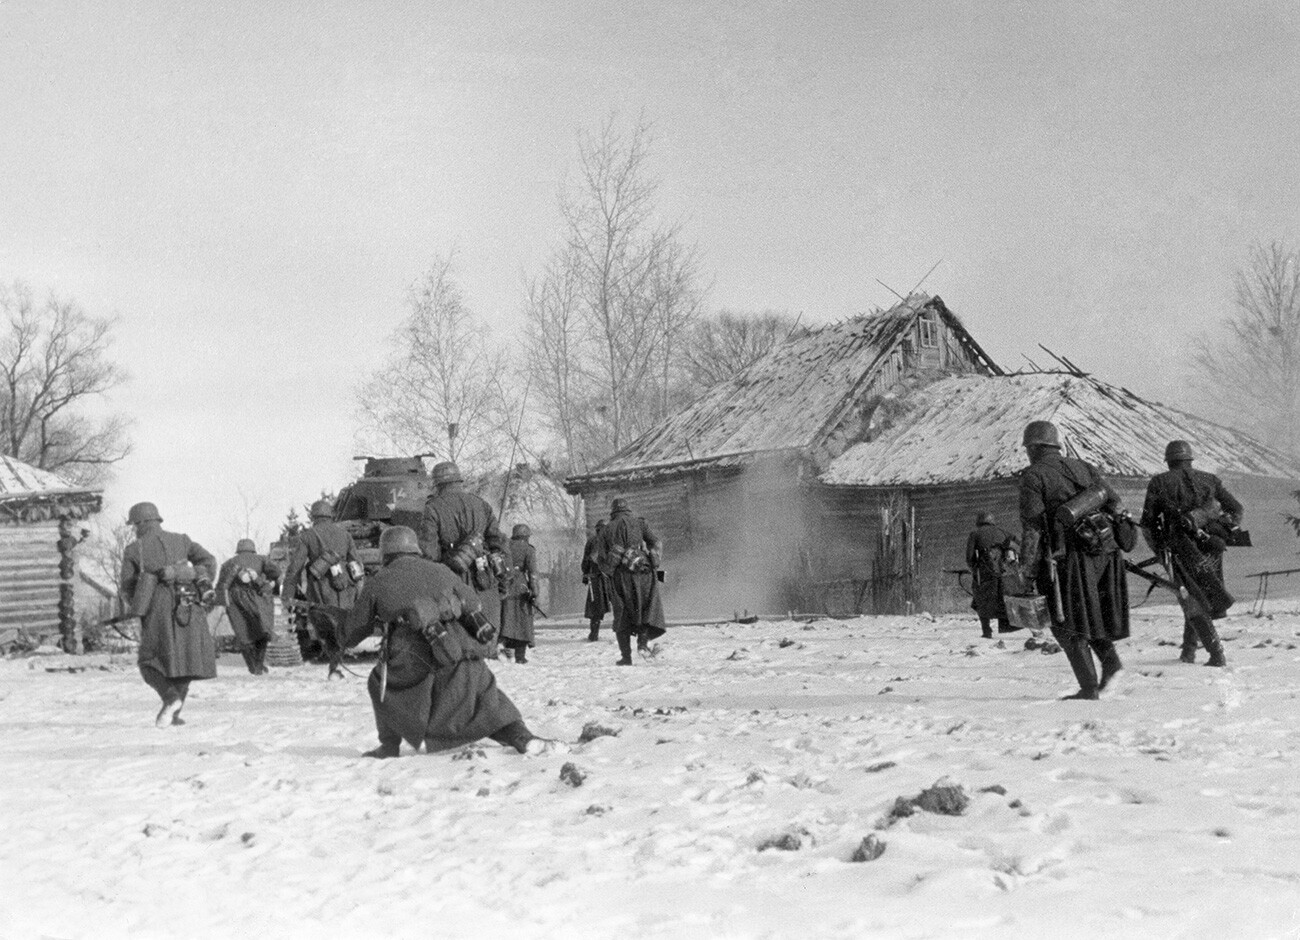  Battle of Moscow Oct.41-Jan.42: German tanks and infantry advanving onto a village in the district of Wolokolamsk / Klin. December 1941 